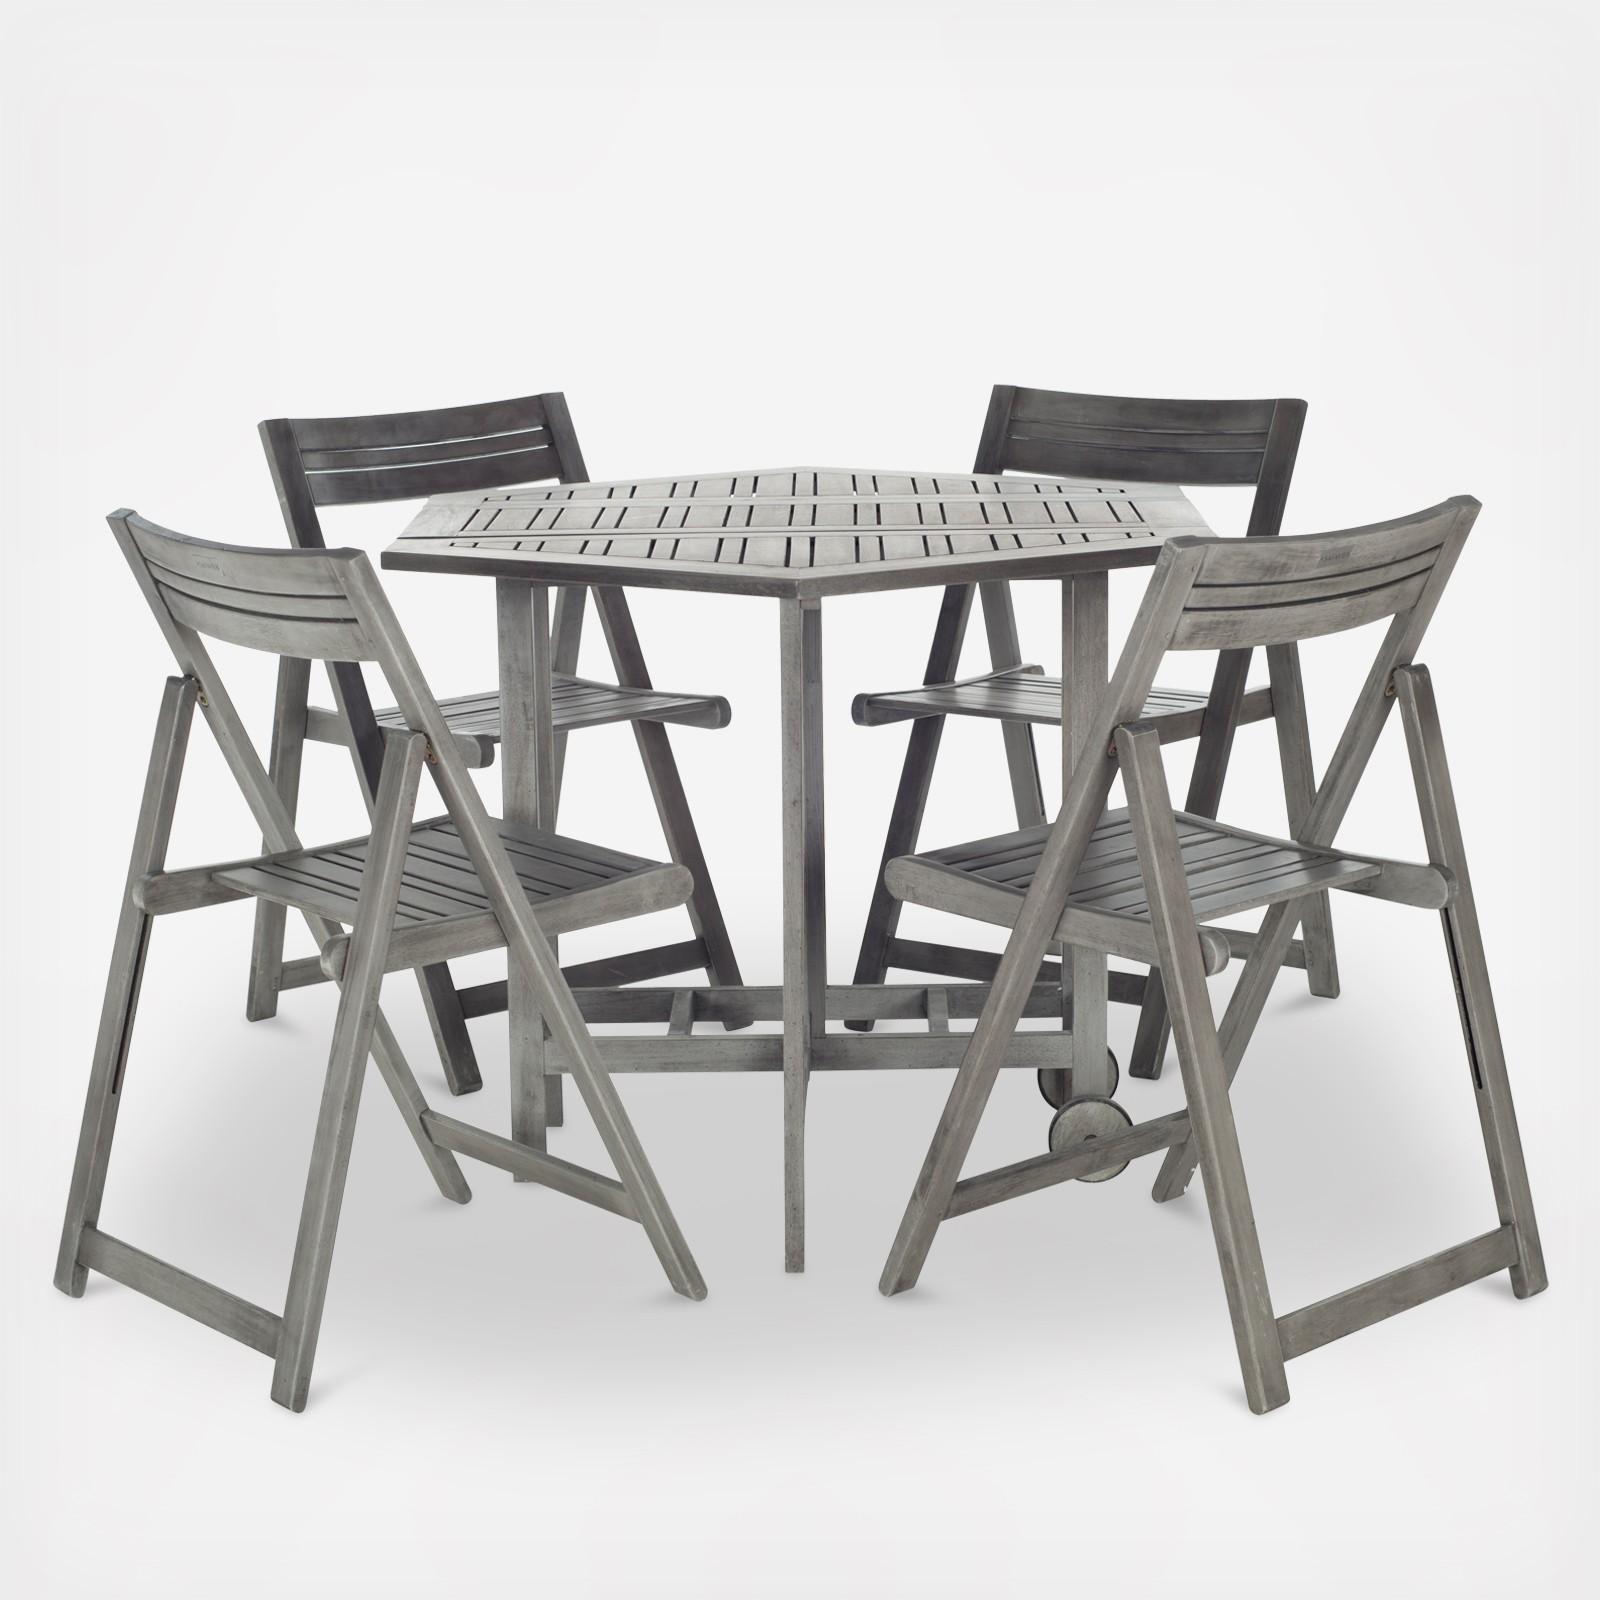 Featured image of post Collapsible Outdoor Dining Table : Collection by dutchcrafters amish furniture.